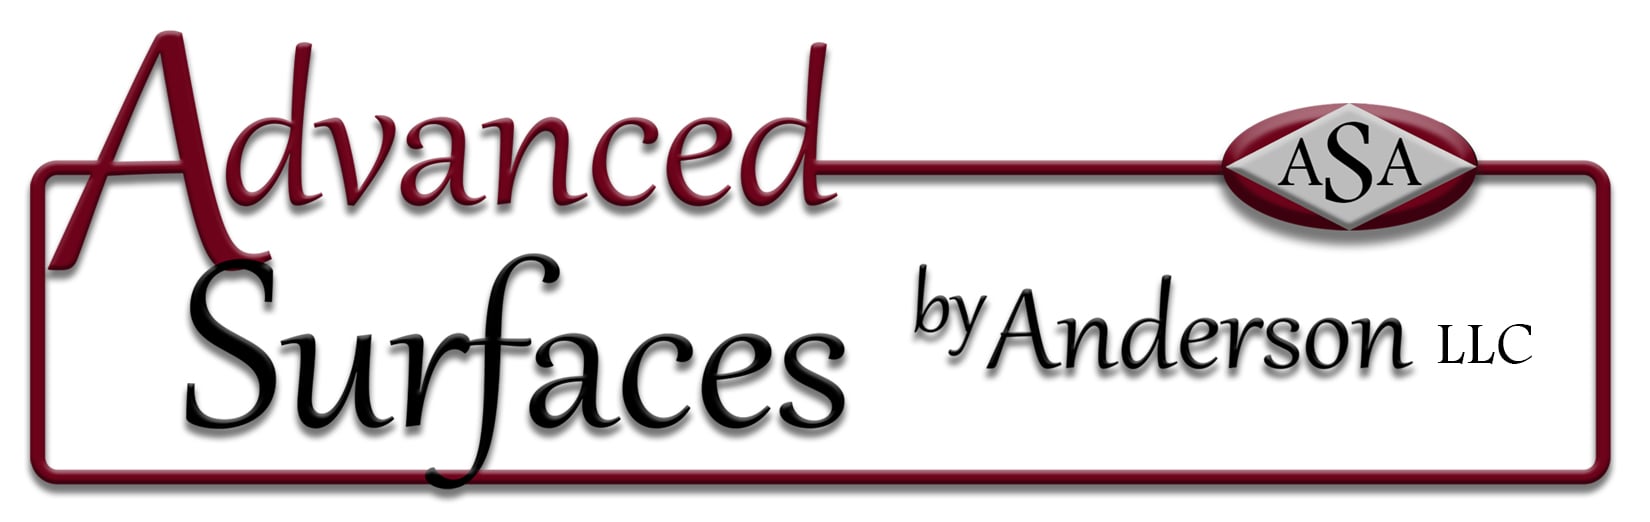 Advanced Surfaces by Anderson, LLC Logo